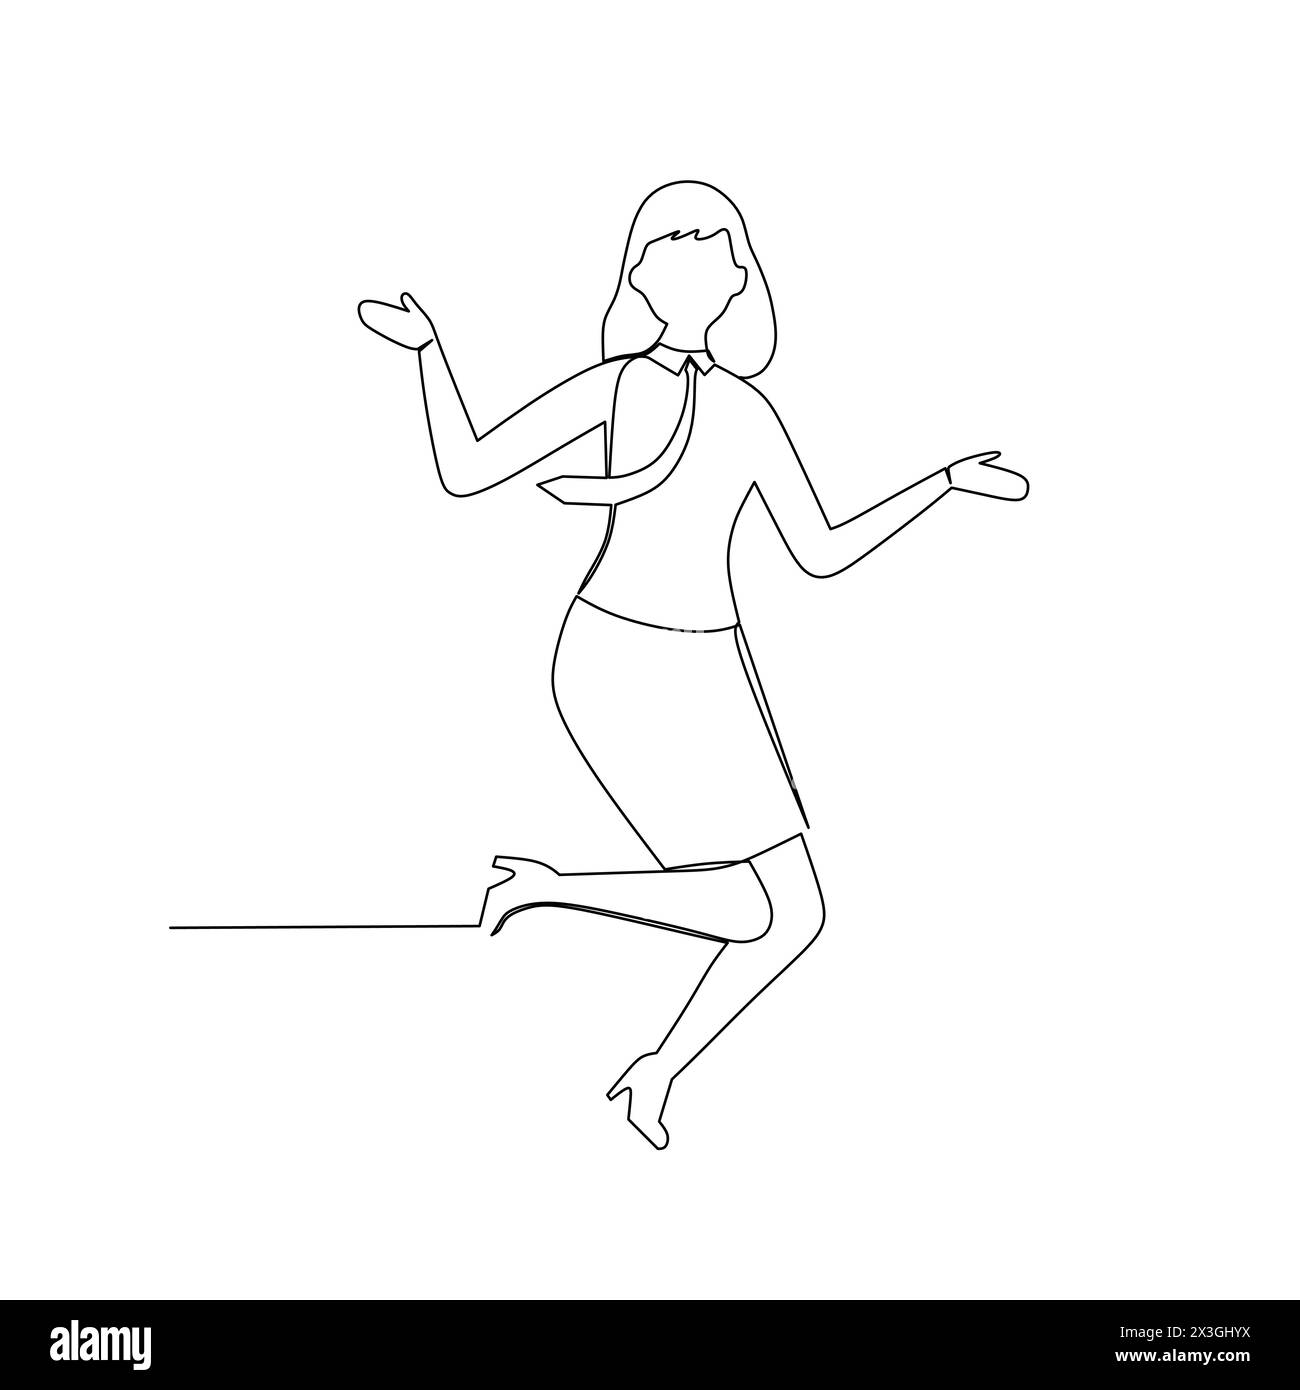 continuous line drawing of a businesswoman jumping. Simple hand drawn style design for business illustration and concept Stock Vector